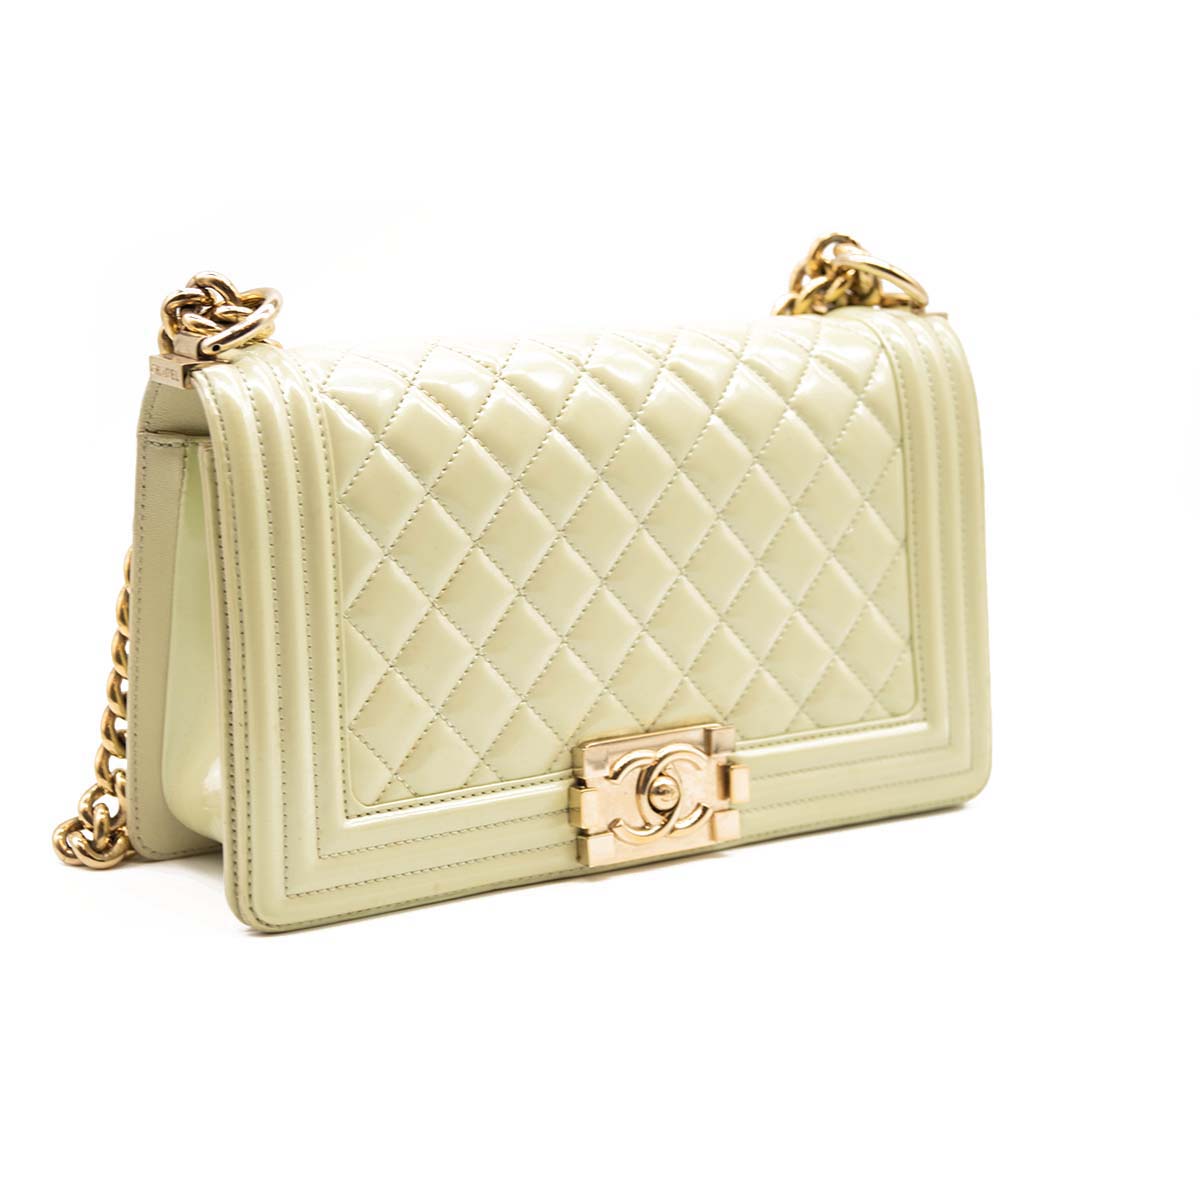 CHANEL Chanel Mint Green Quilted Patent Leather Medium Boy Flap Bag -  MyDesignerly